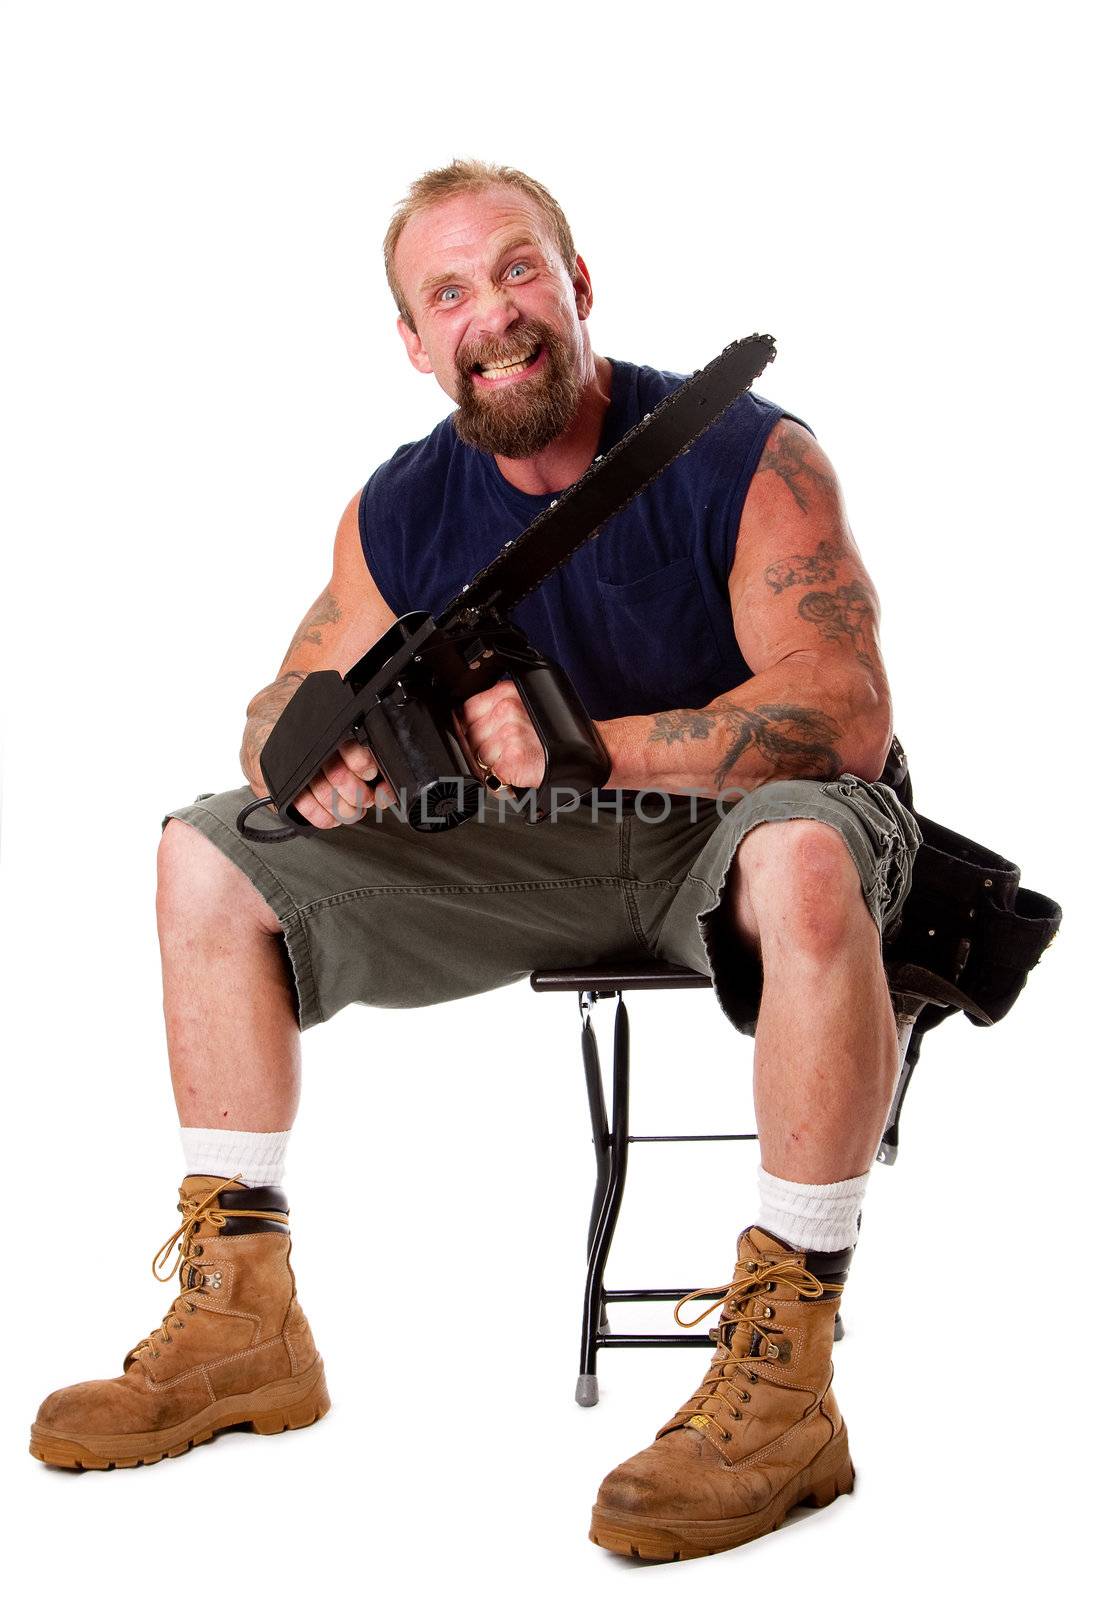 Crazy Caucasian man with tattoos and chainsaw sitting on stool with strong facial expression, isolated.